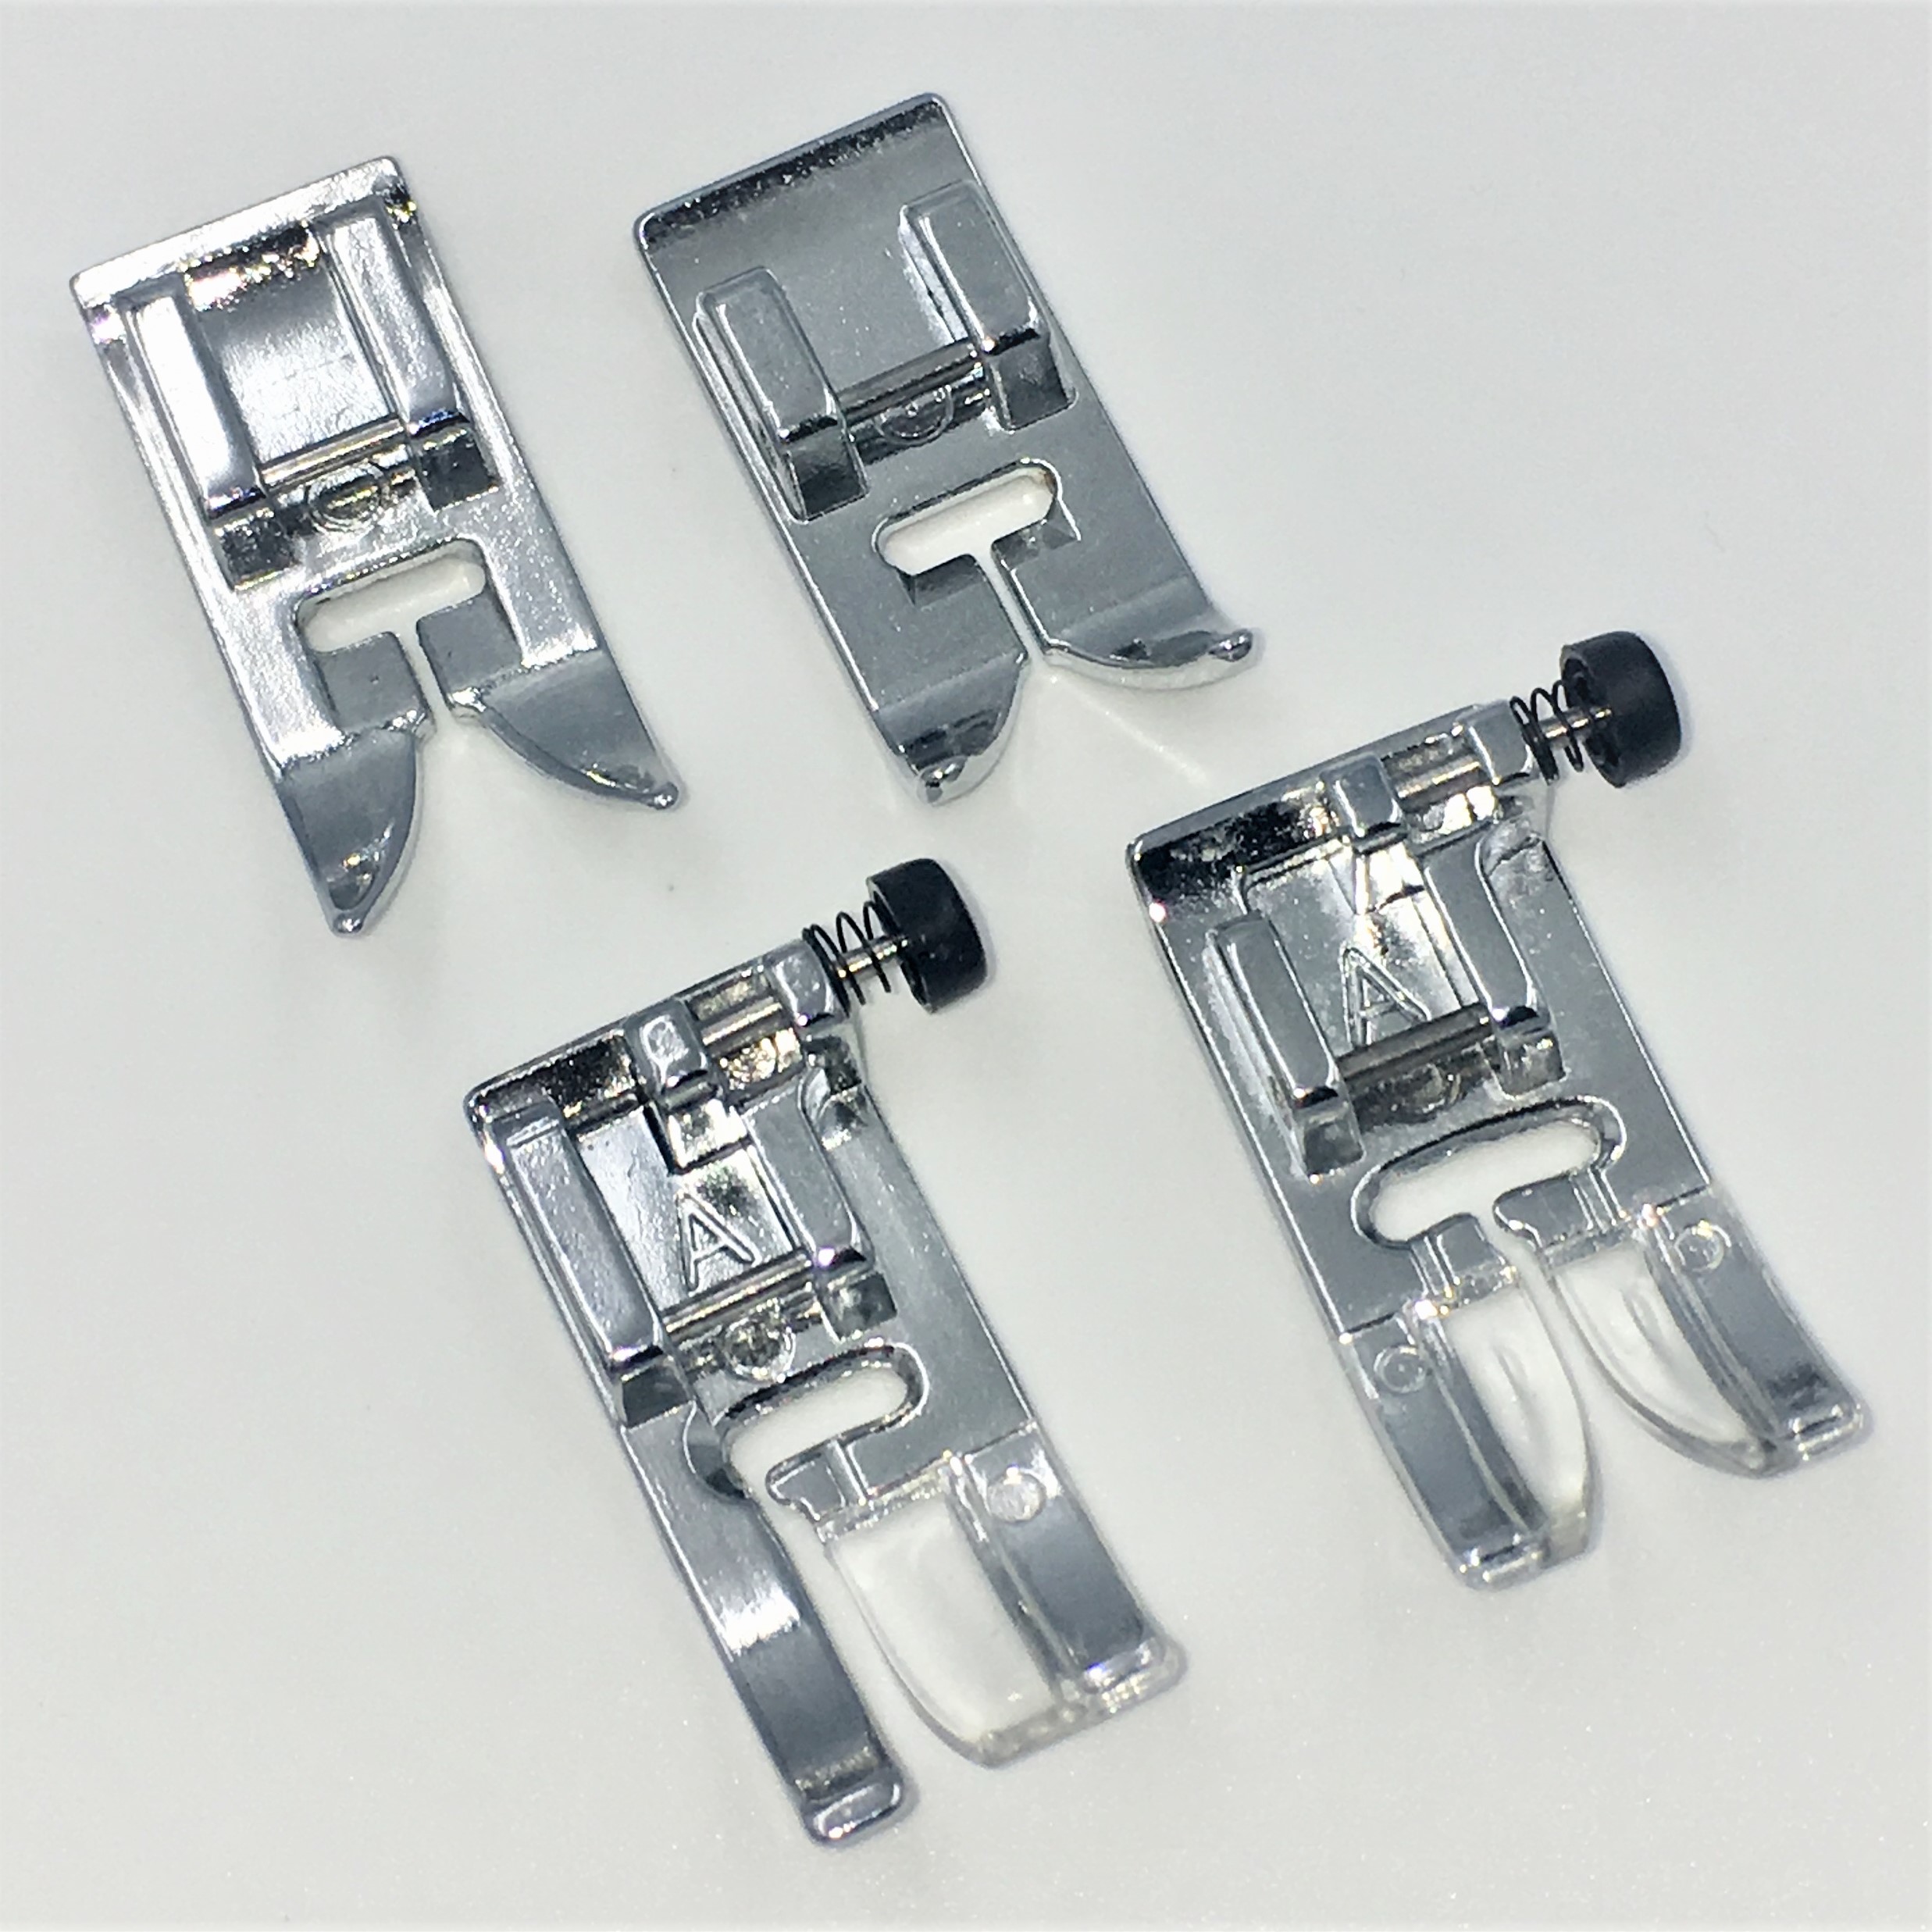 HONEYSEW Sewing Machine Presser Foot Low Shank Fringe Foot for Janome Top Loading Models New Home Janome Top-Load Fringe Foot 